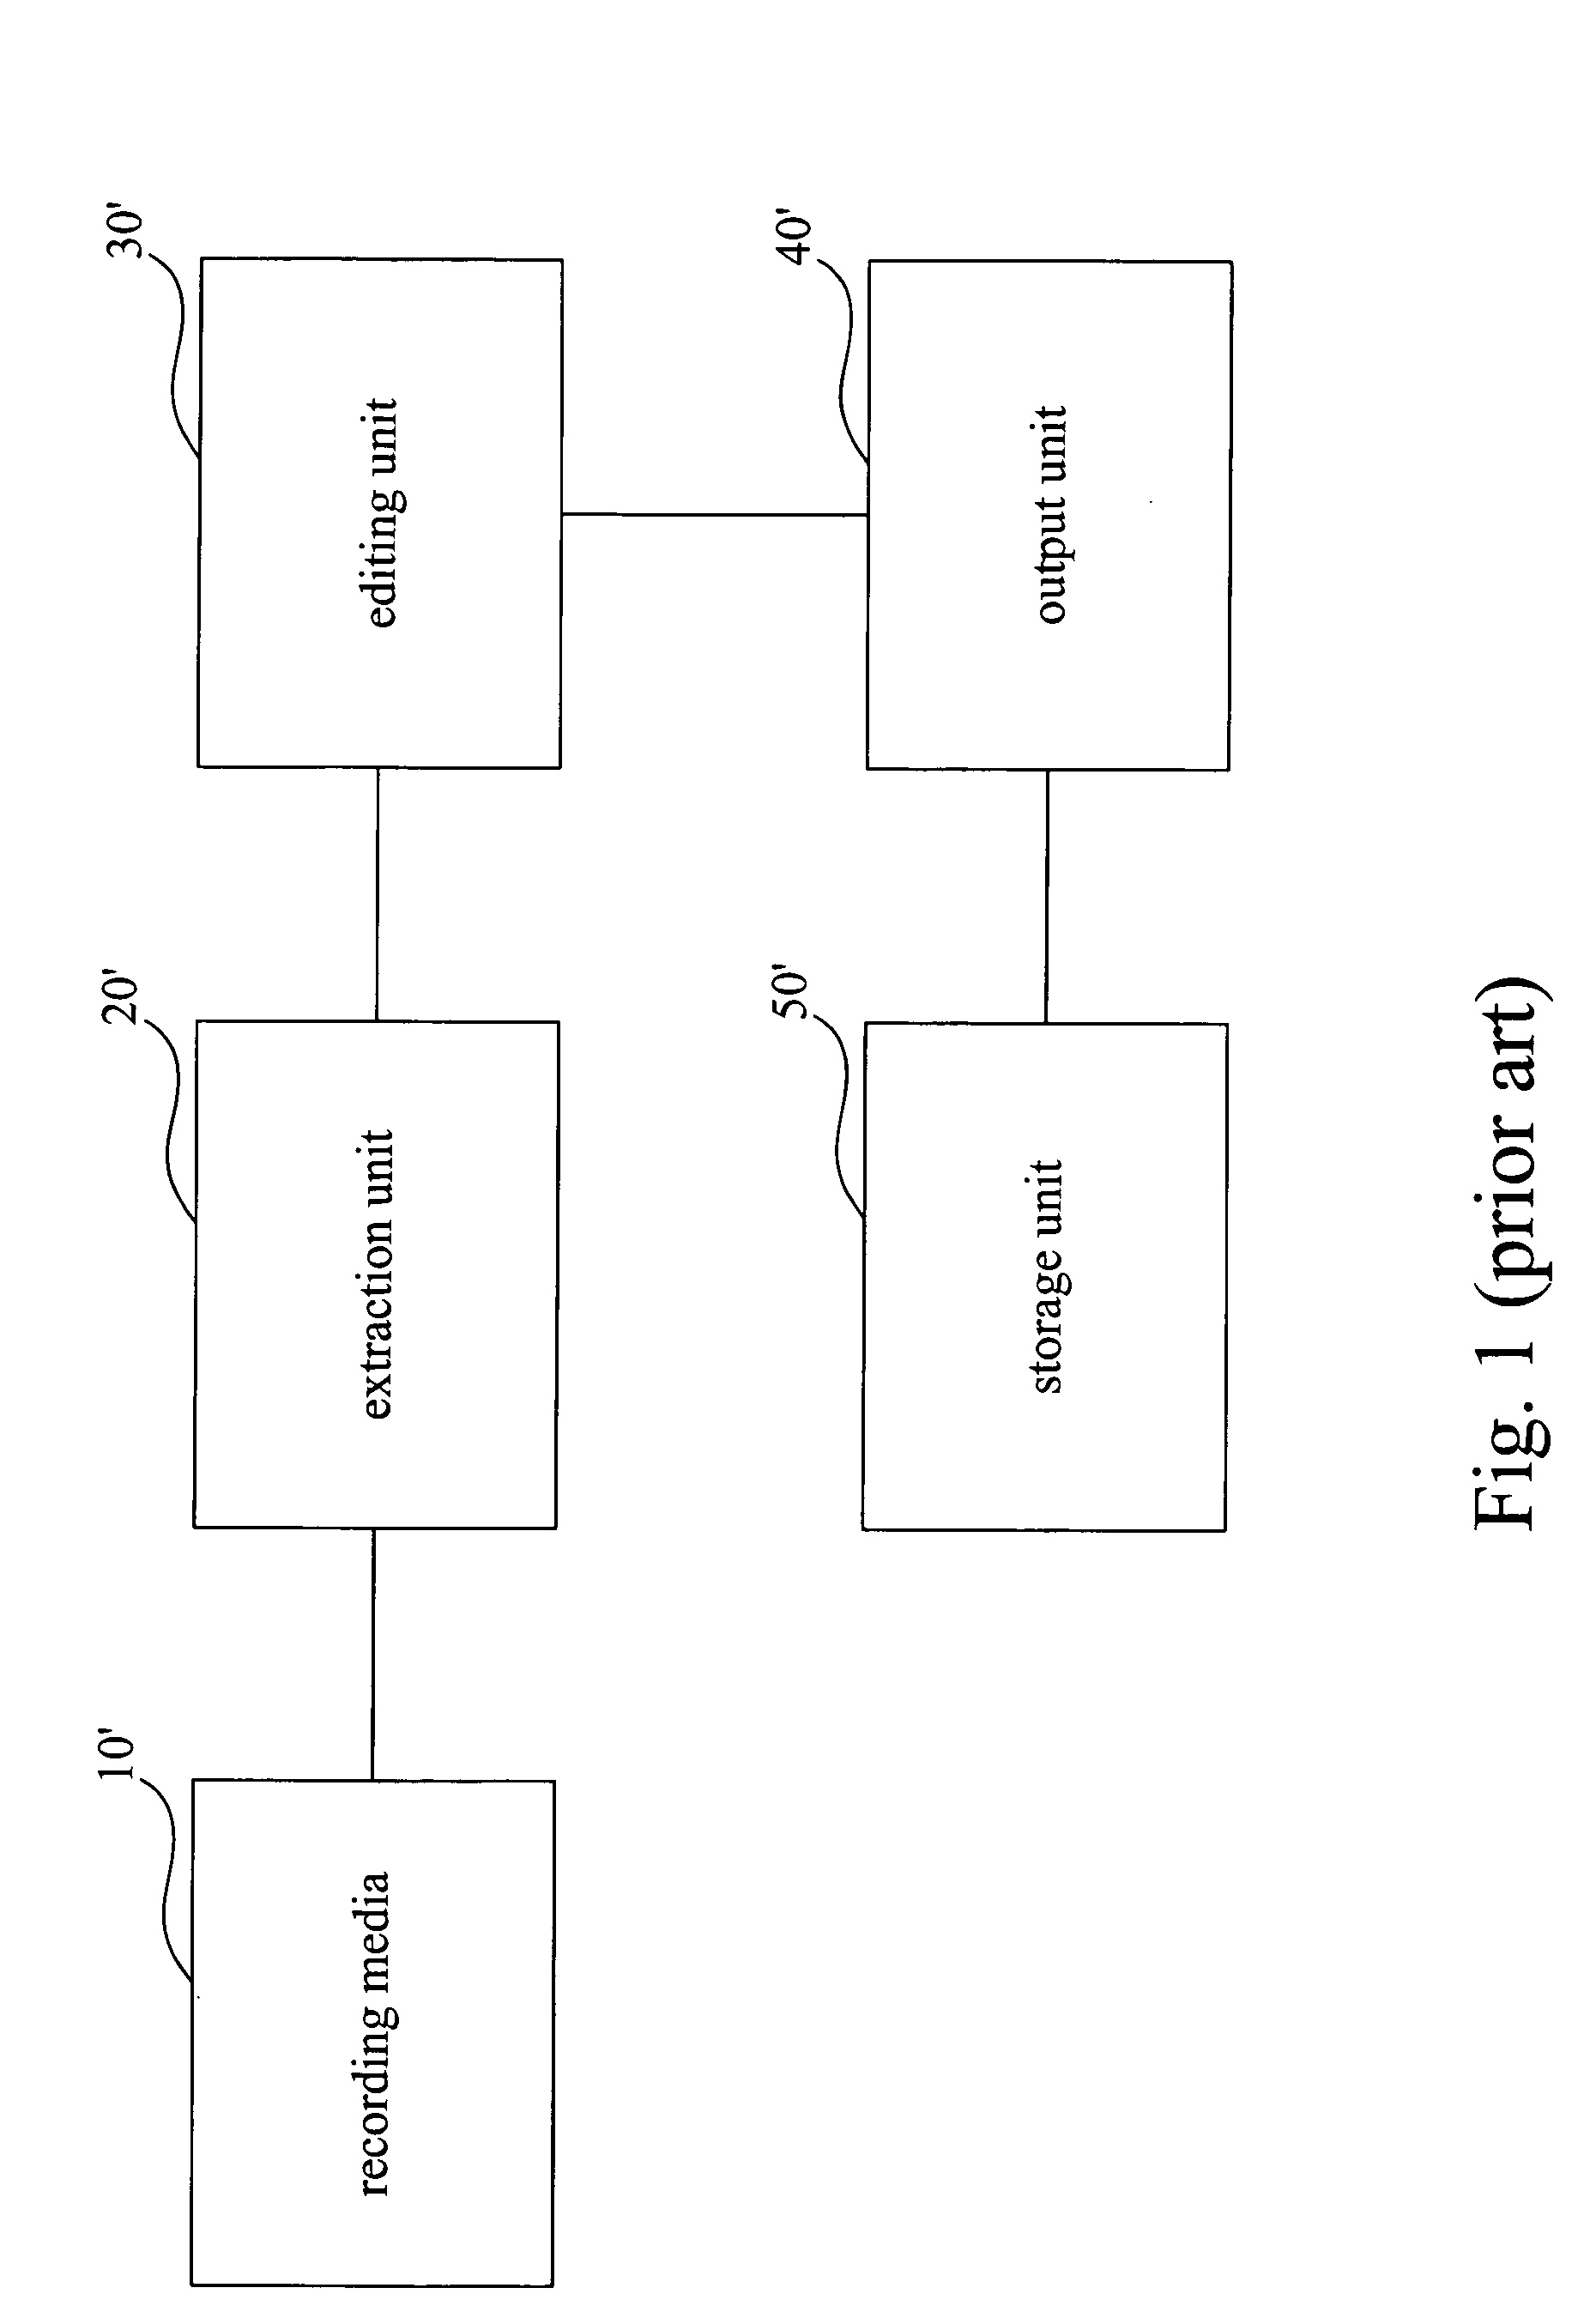 System and method for extracting data from recording media